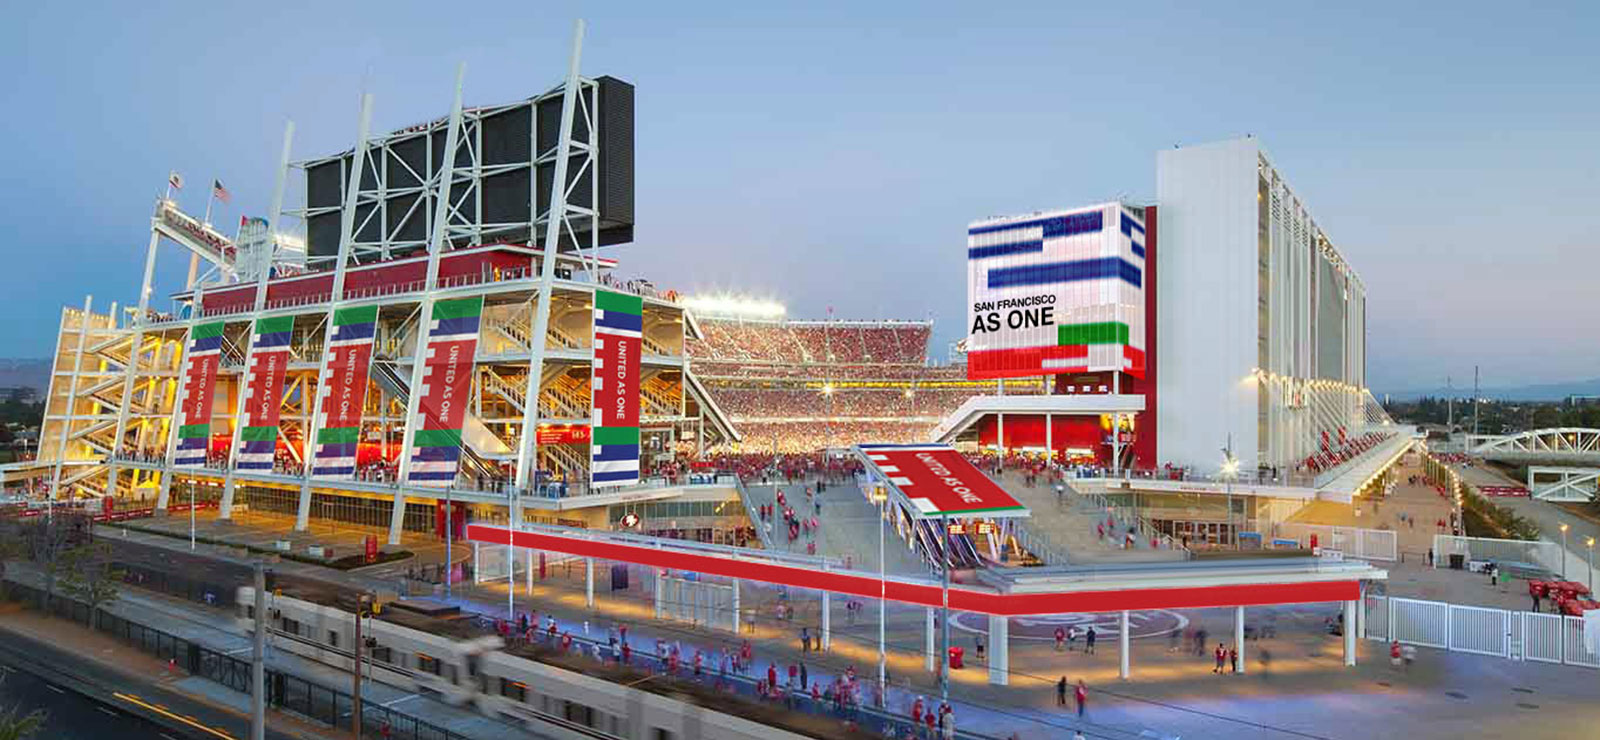 United Bid Selected to Host the 2026 FIFA World Cup - Levi's® Stadium